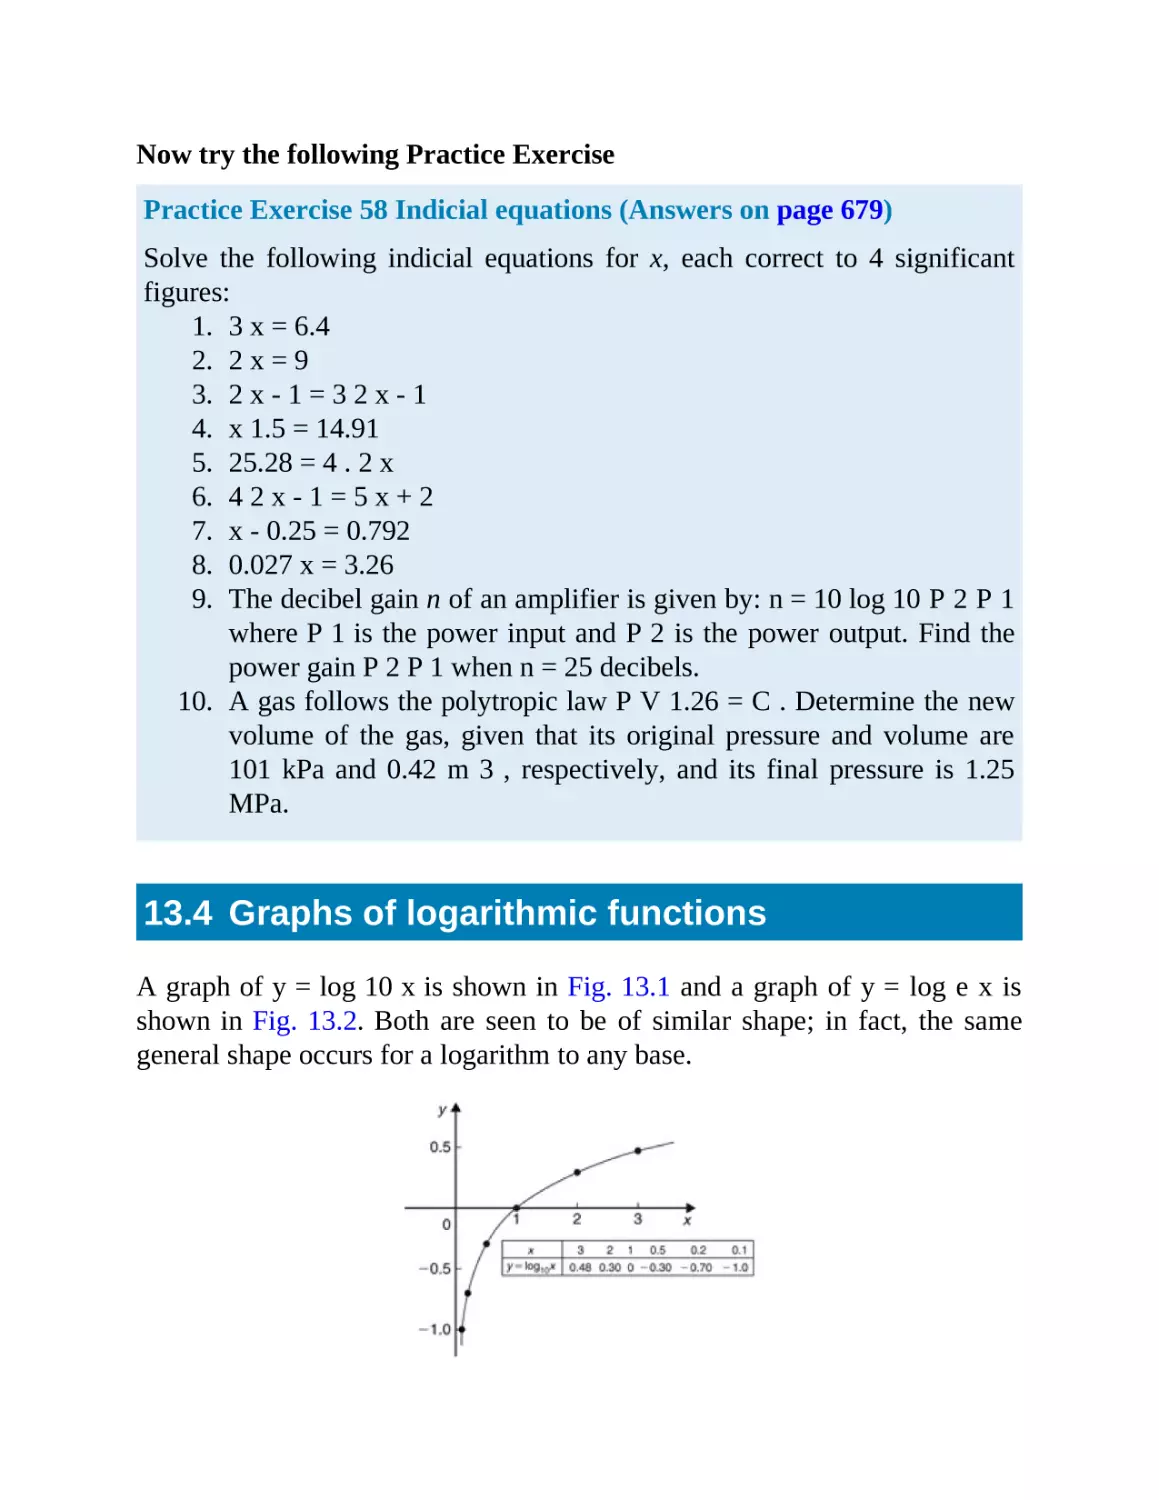 13.4 Graphs of logarithmic functions